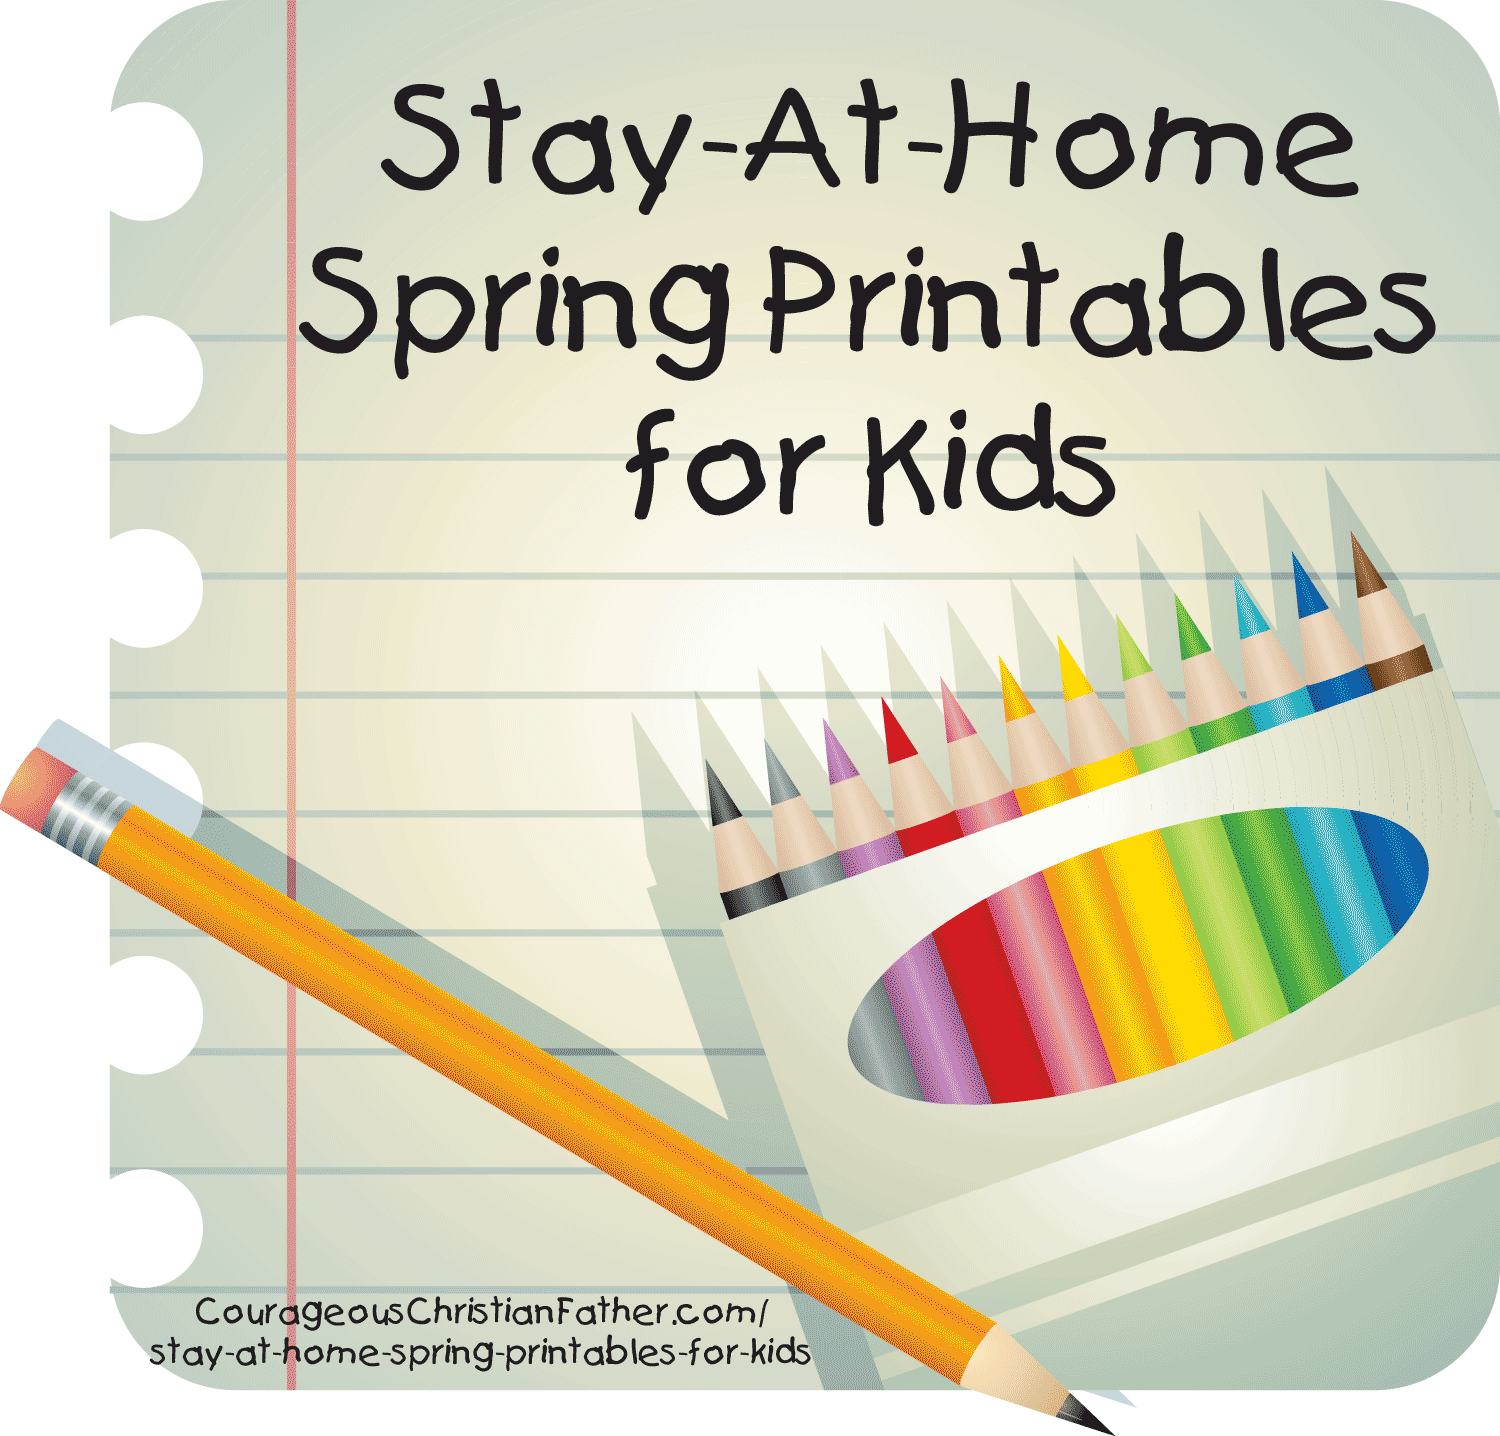  Stay-At-Home Spring Printables for Kids - Here are some free printables for your children to do while they are staying at home. #Printables #FreePrintables